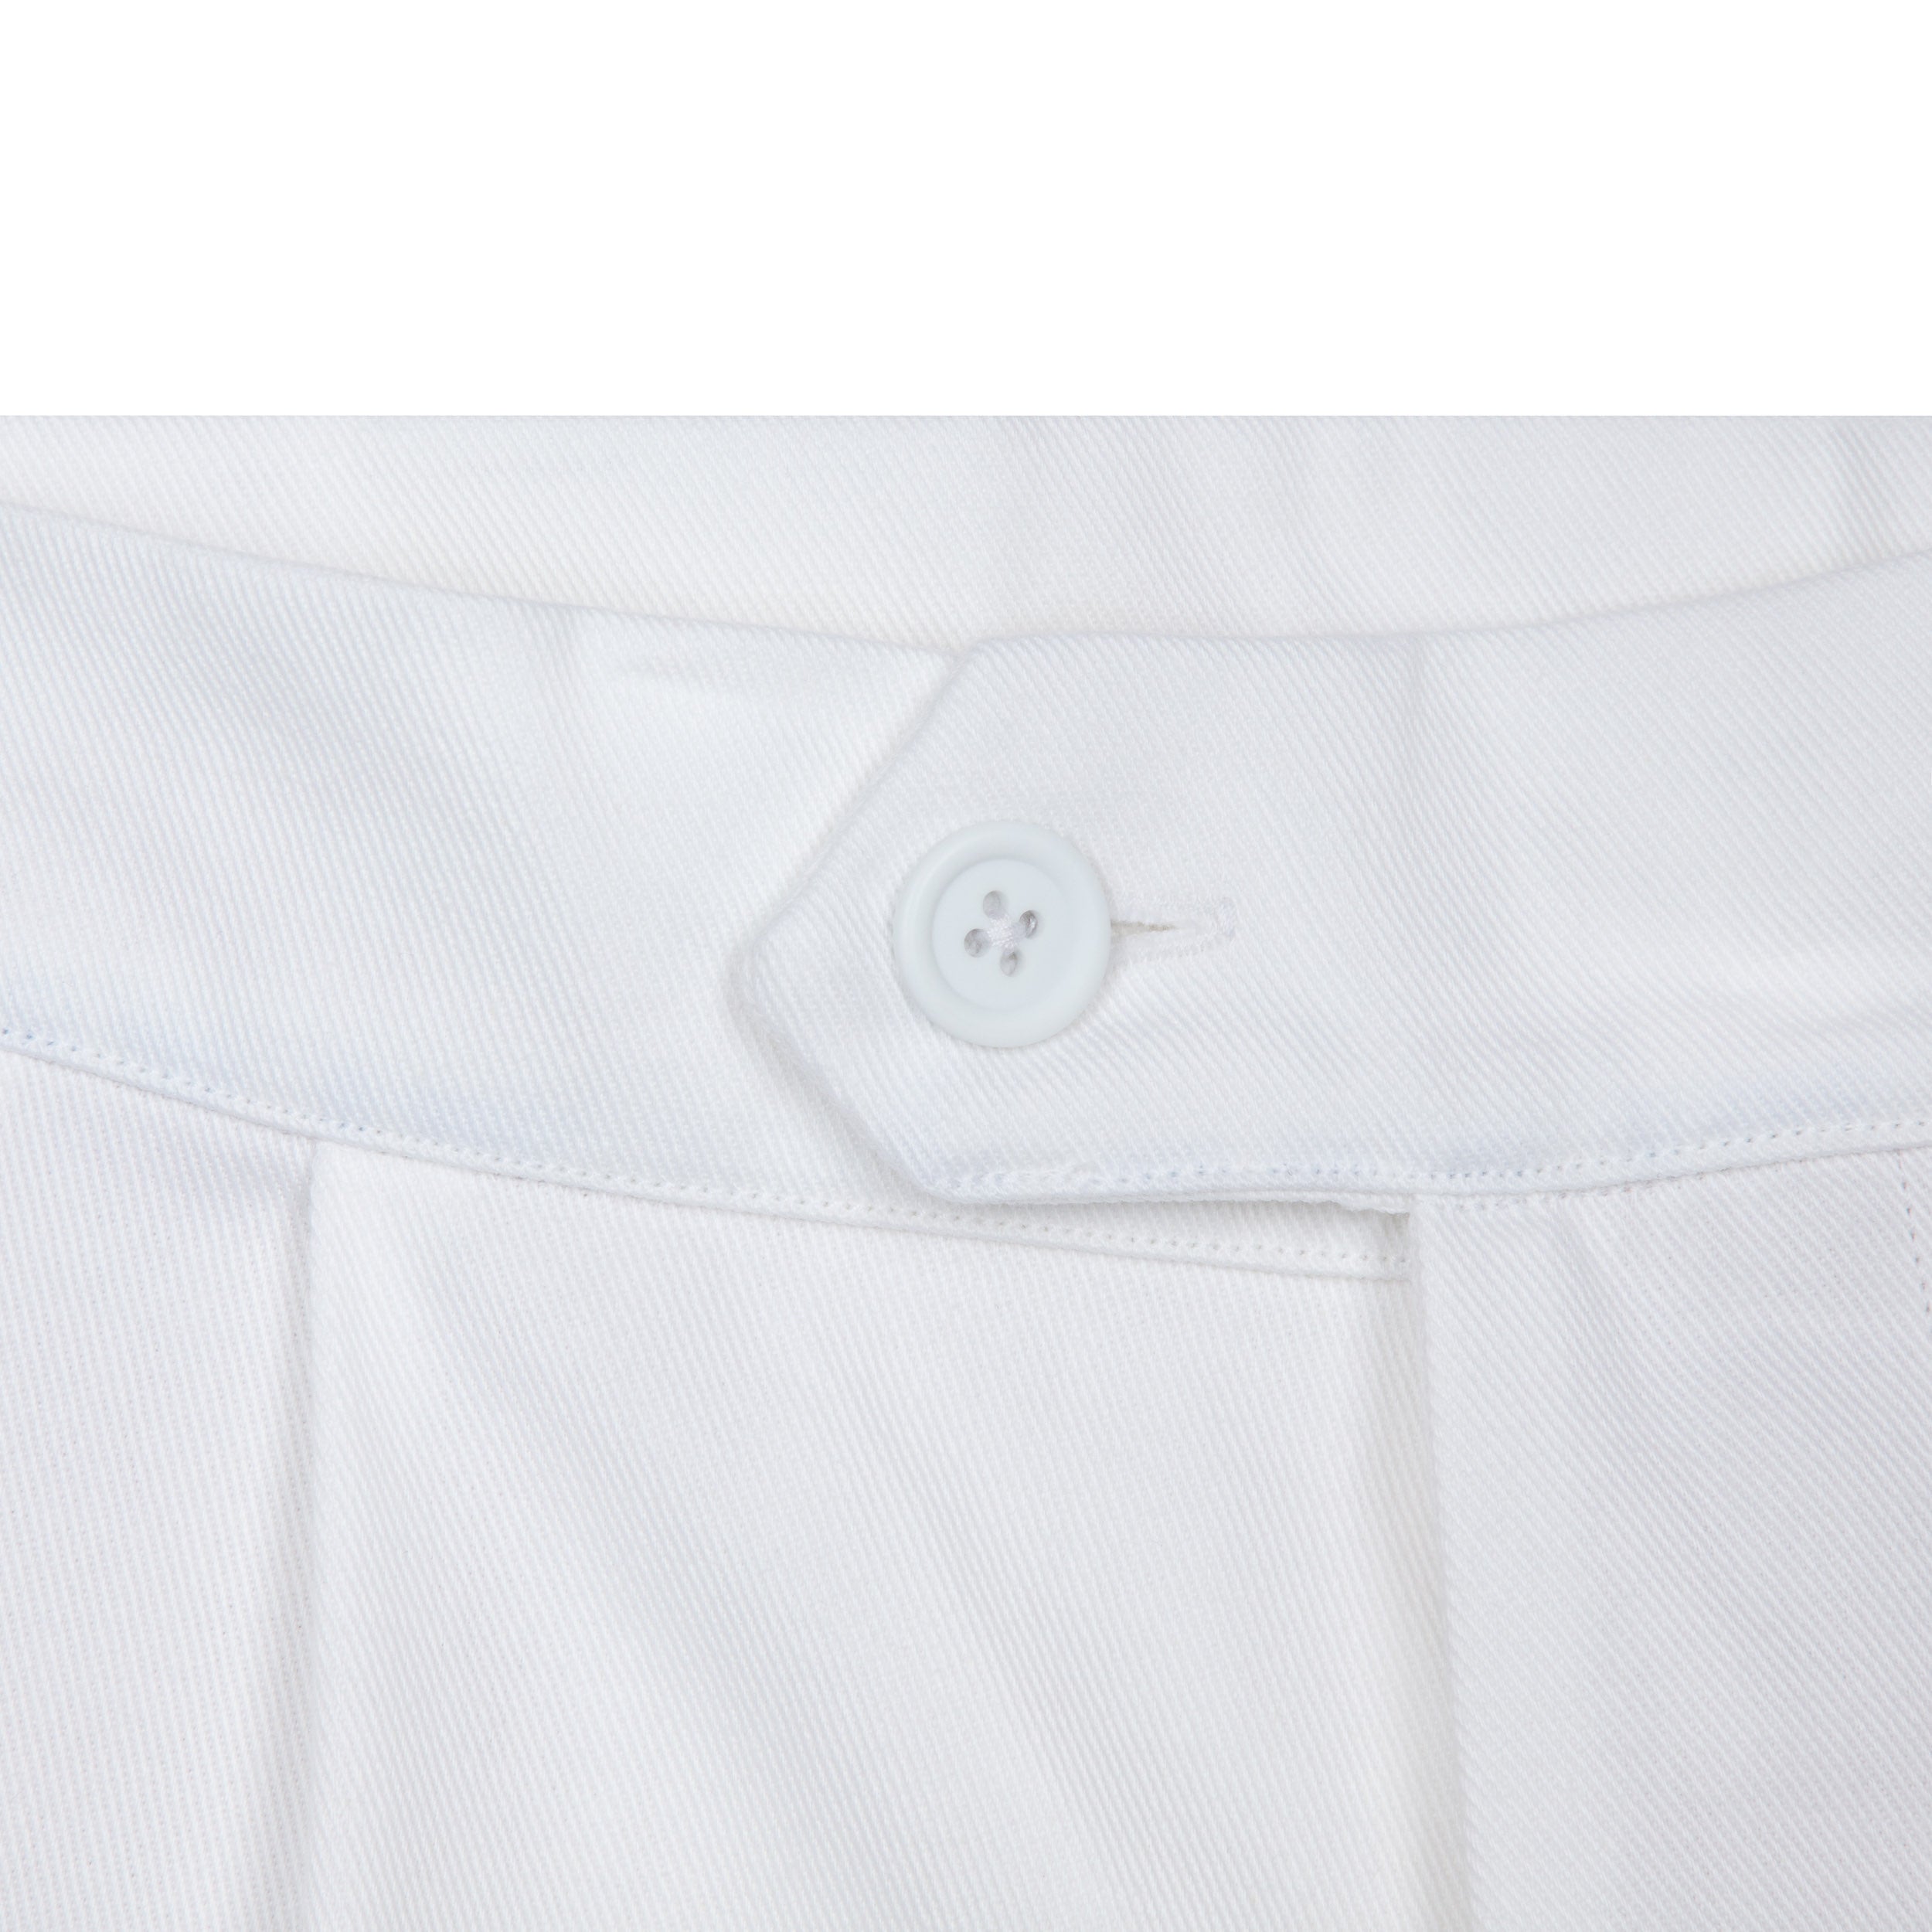 Carrier Company Ladies Shorts in White